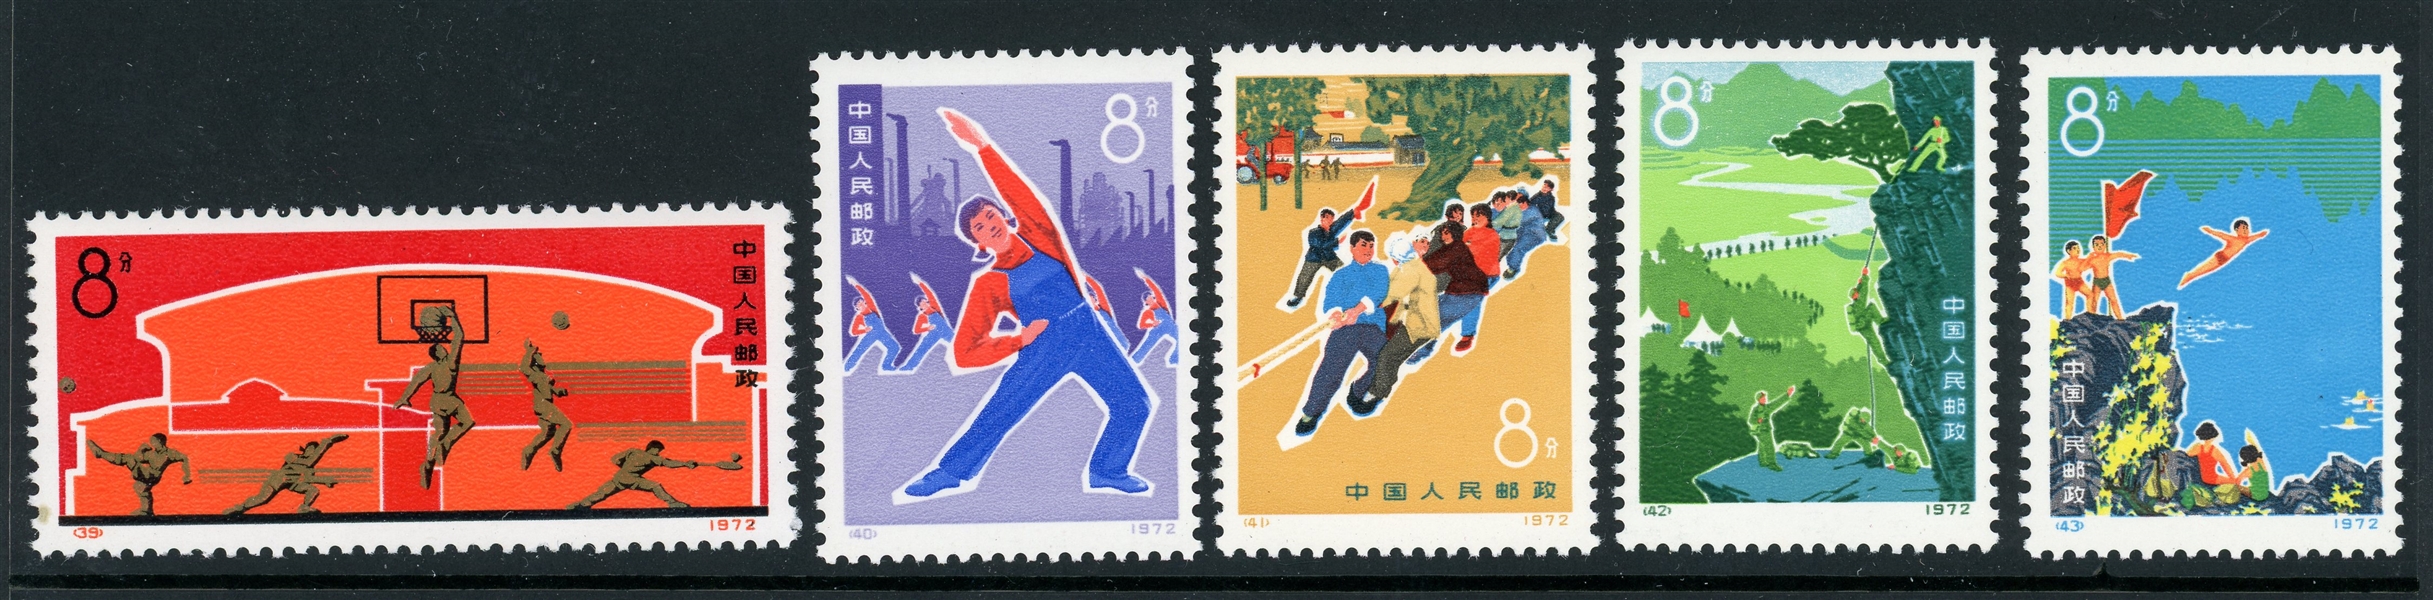 People's Republic of China Scott 1090-1094 MLH F-VF Complete Set - 1972 Sports (SCV $141)